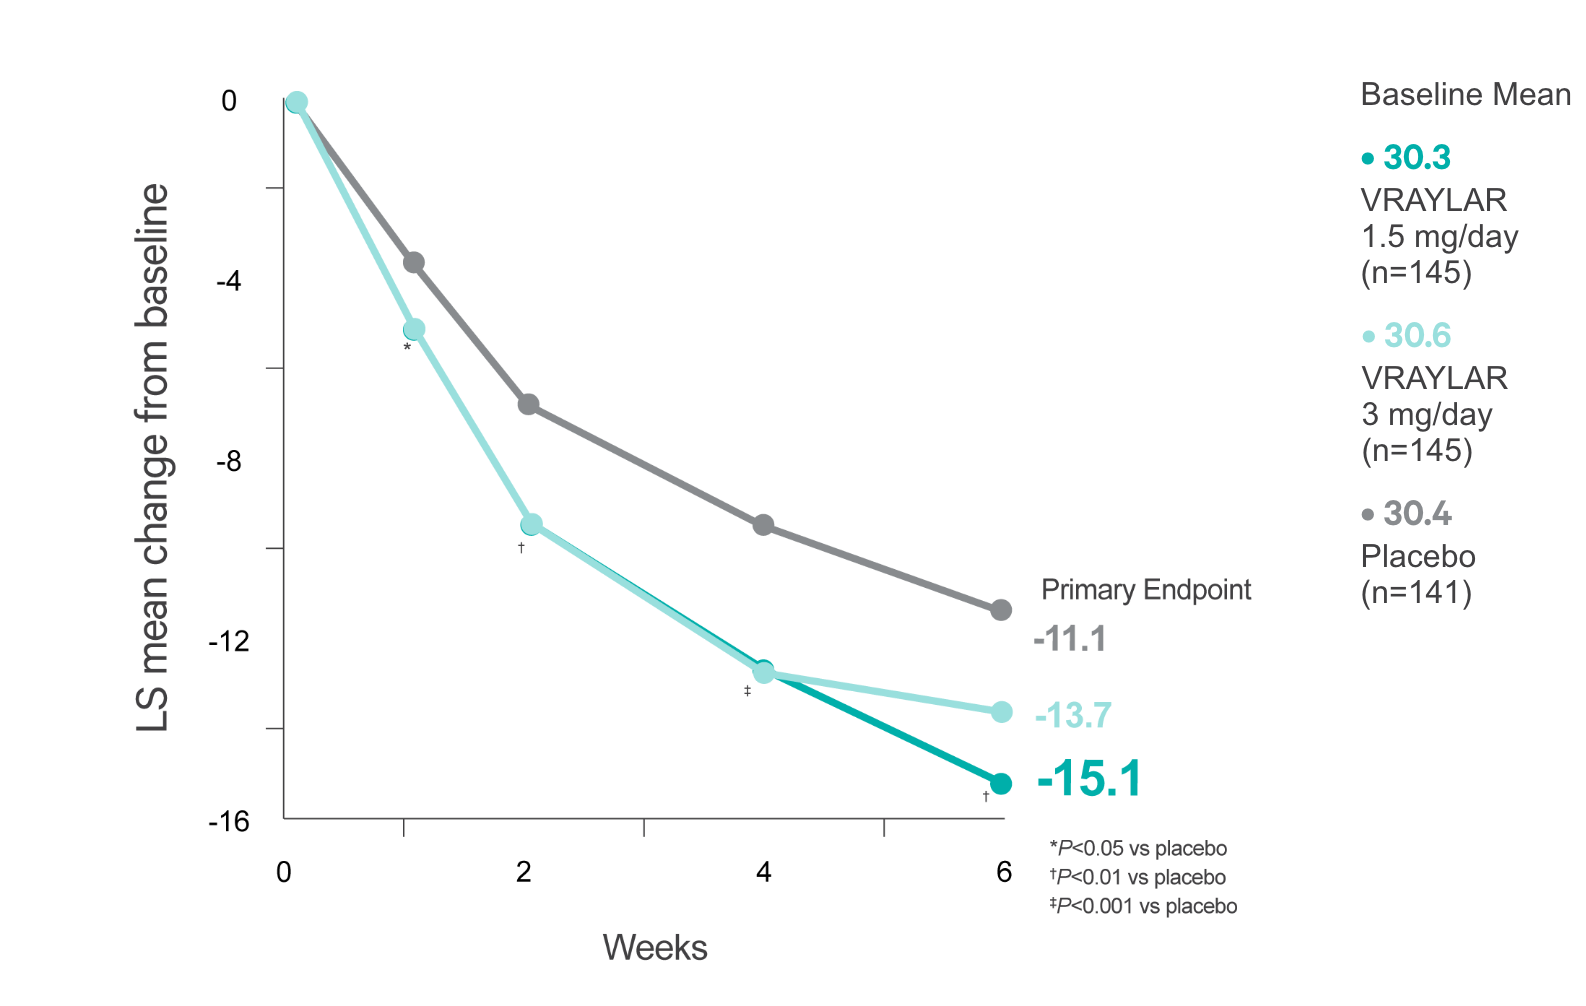 Graph showing change in MADRS total score in VRAYLAR vs placebo for bipolar I depression in study 7.